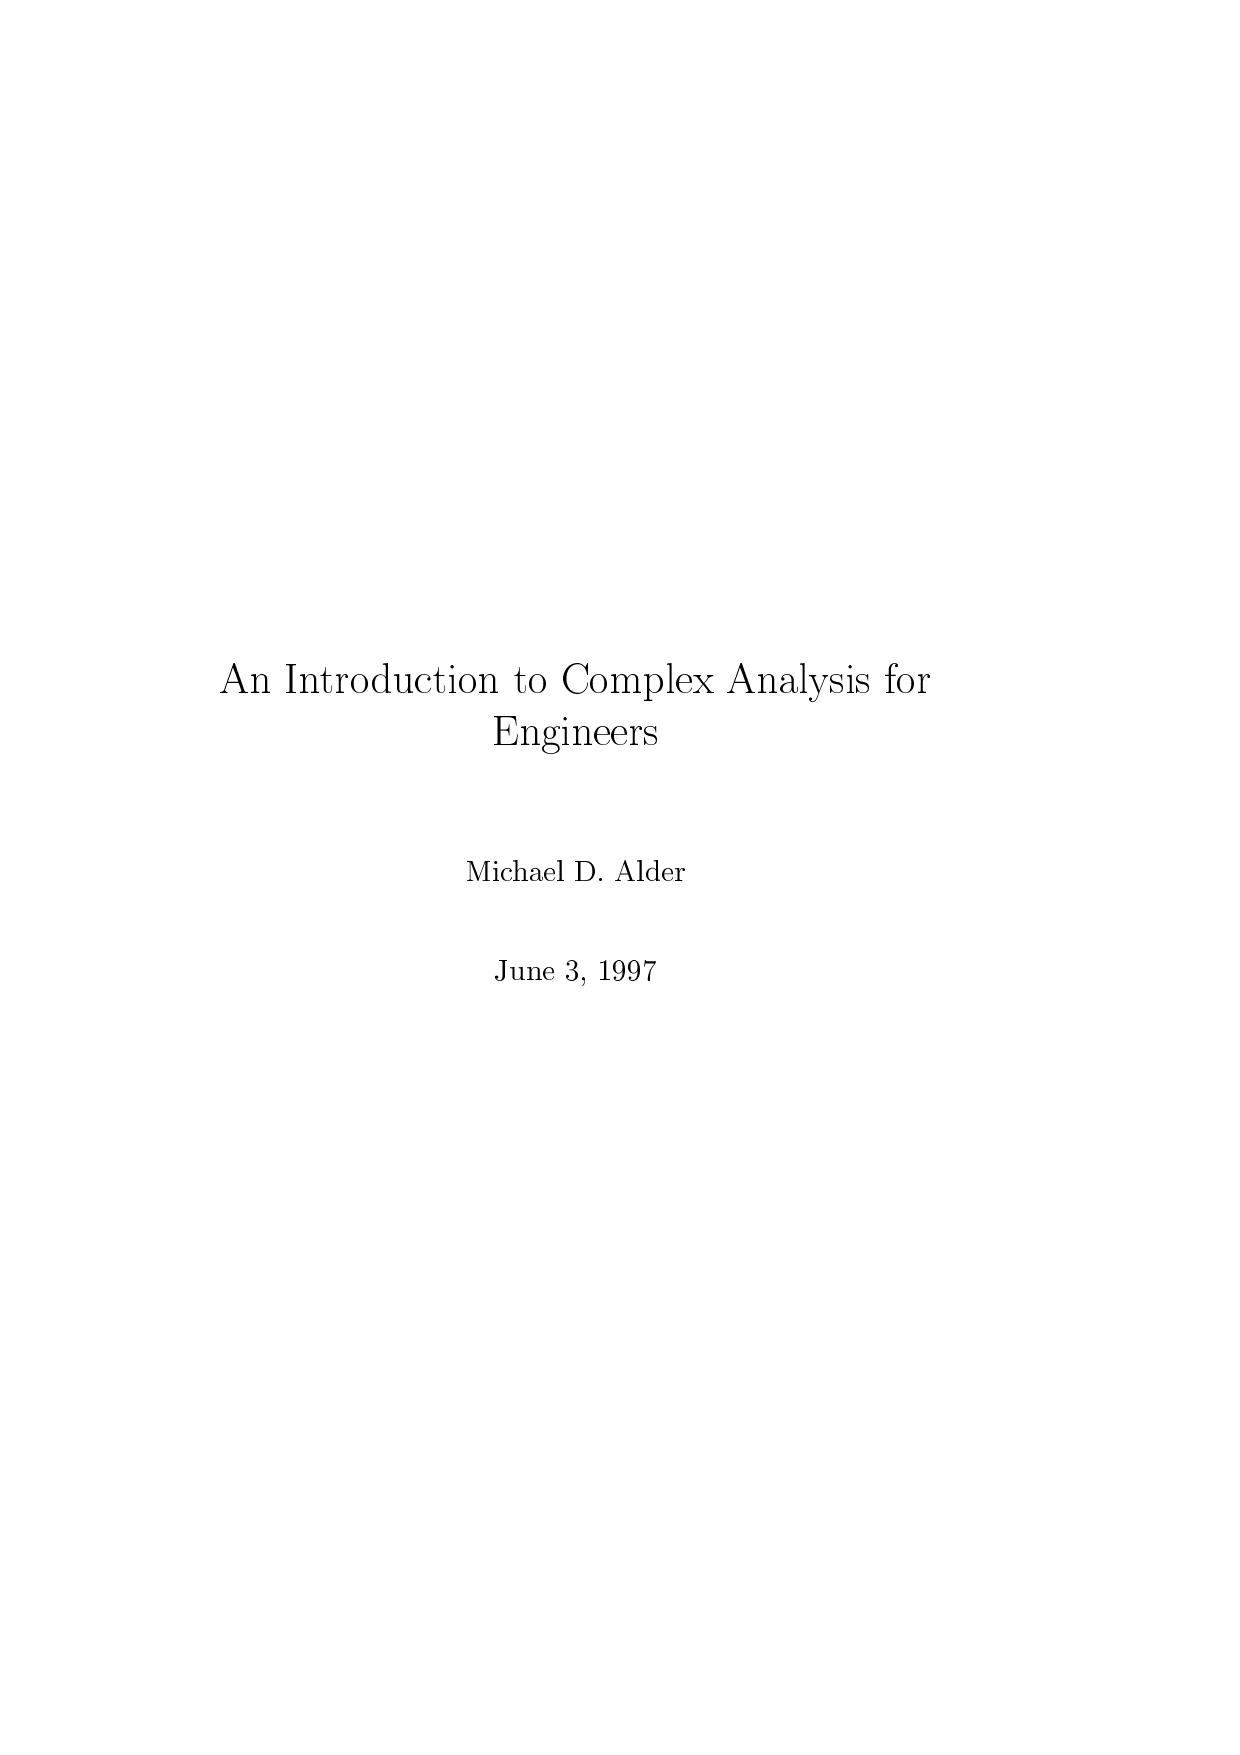 An Introduction to Complex Analysis for Engineers